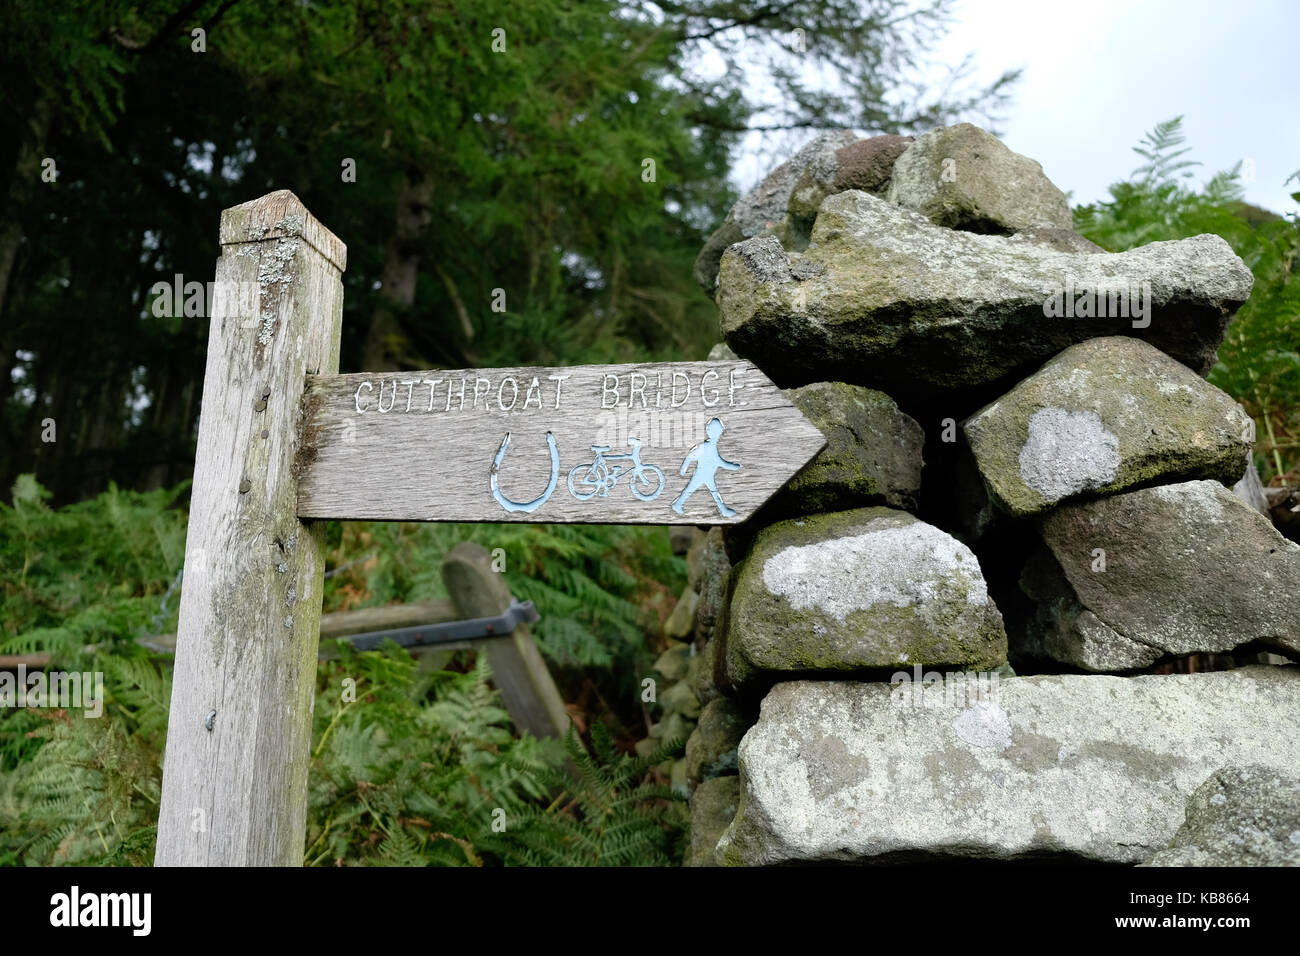 Sign for Cutthroat Bridge by Ashopton, Ladybower Resevoir Stock Photo